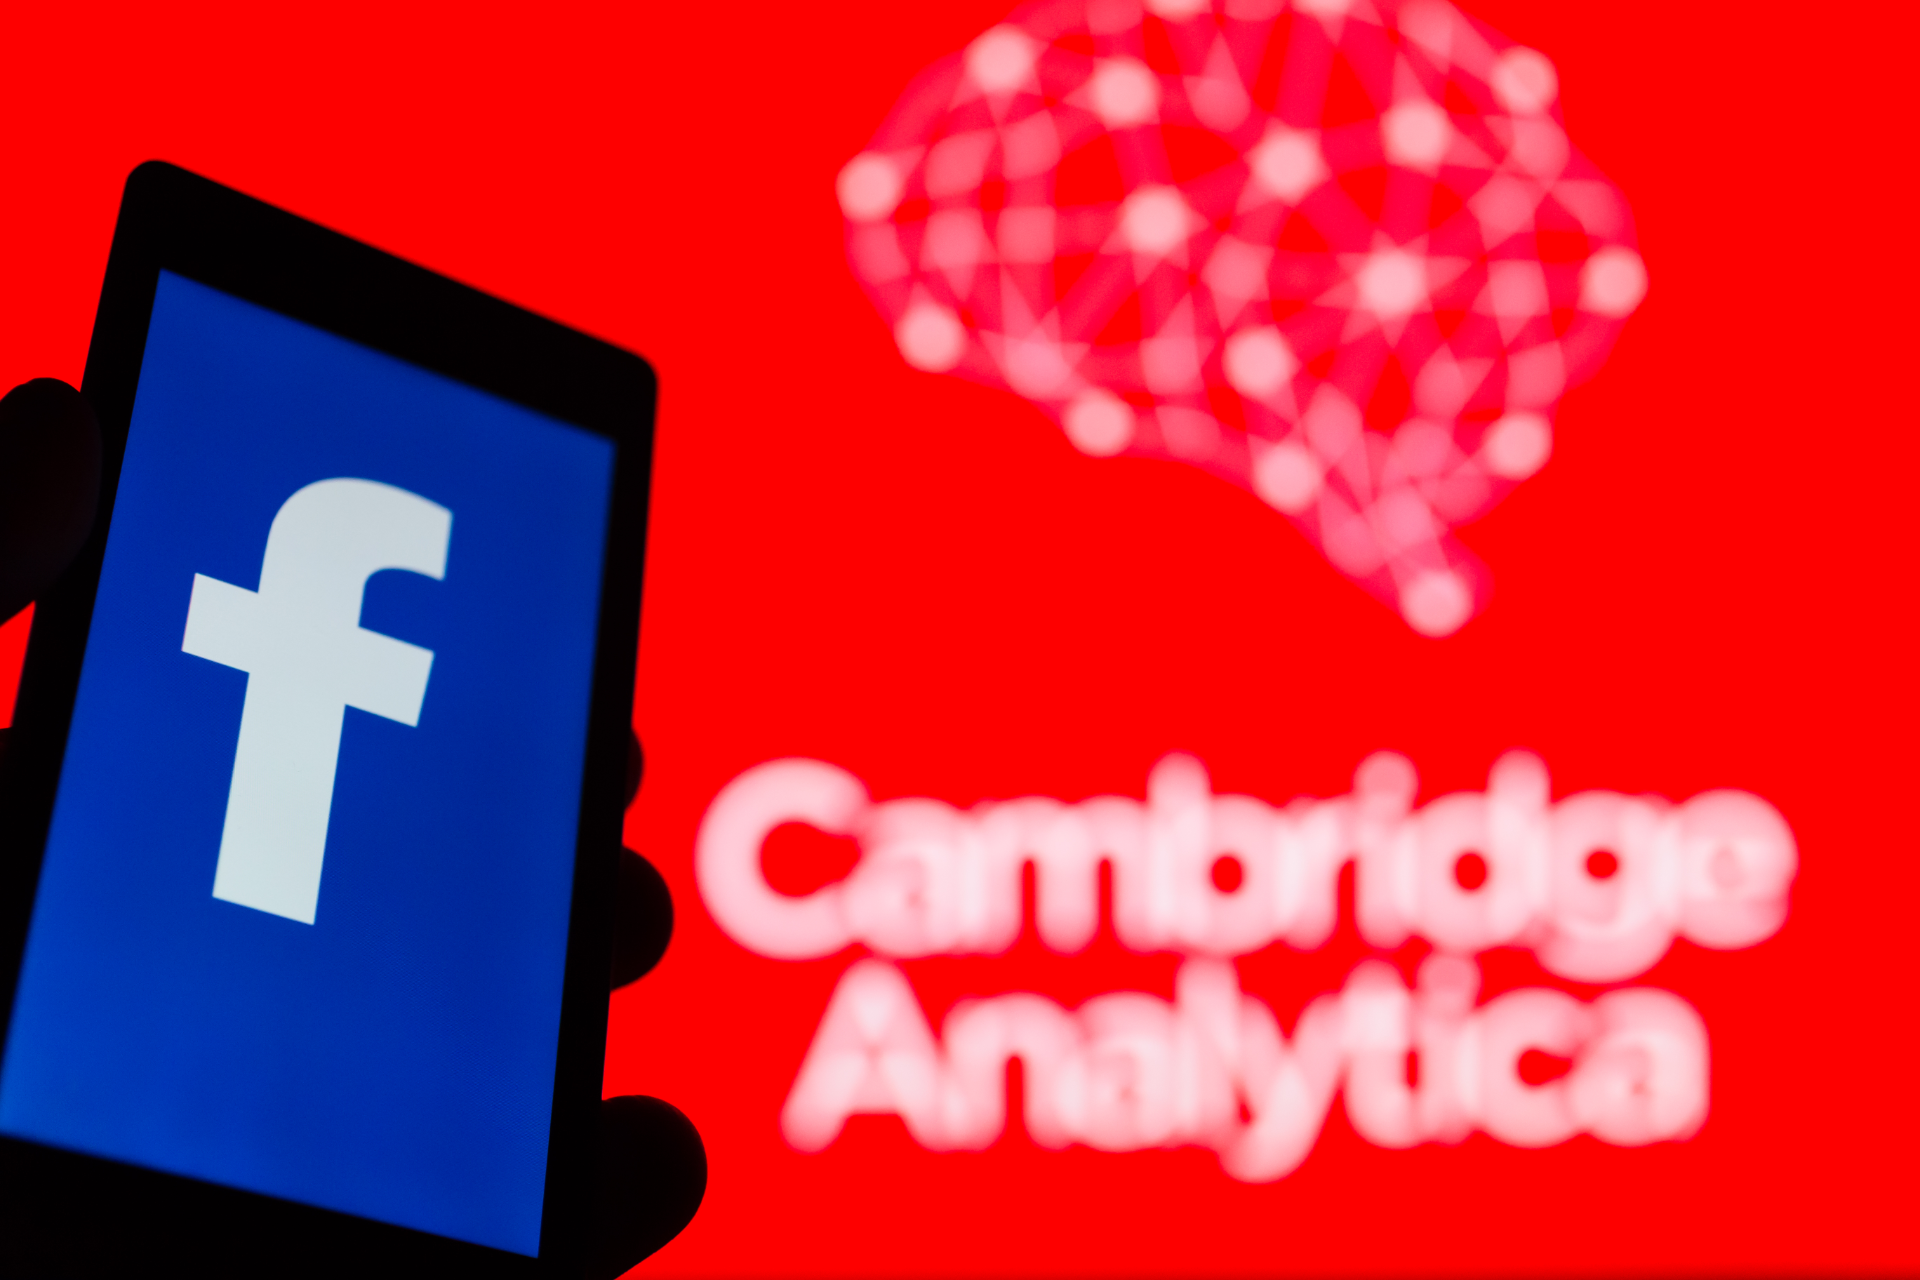 A hand holds a phone with showing a facebook logo. The Cambridge Analytica white-on-red logo is blurry in the background.